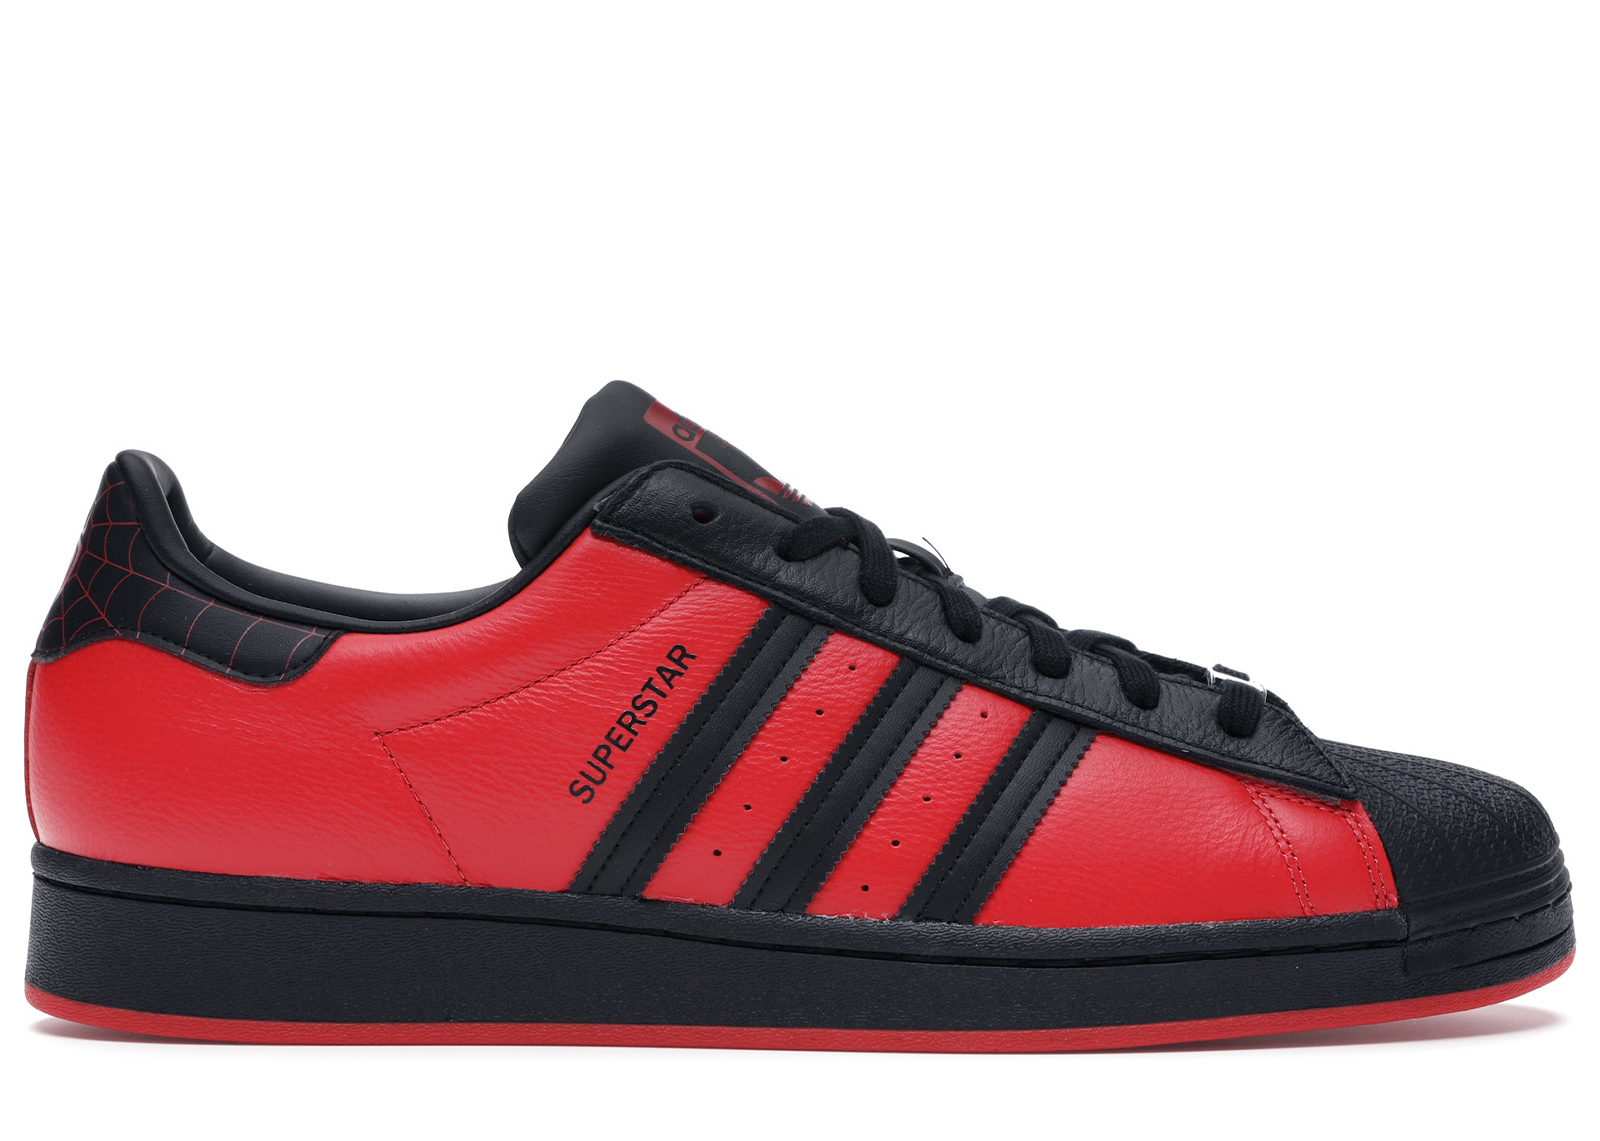 all adidas superstar shoes